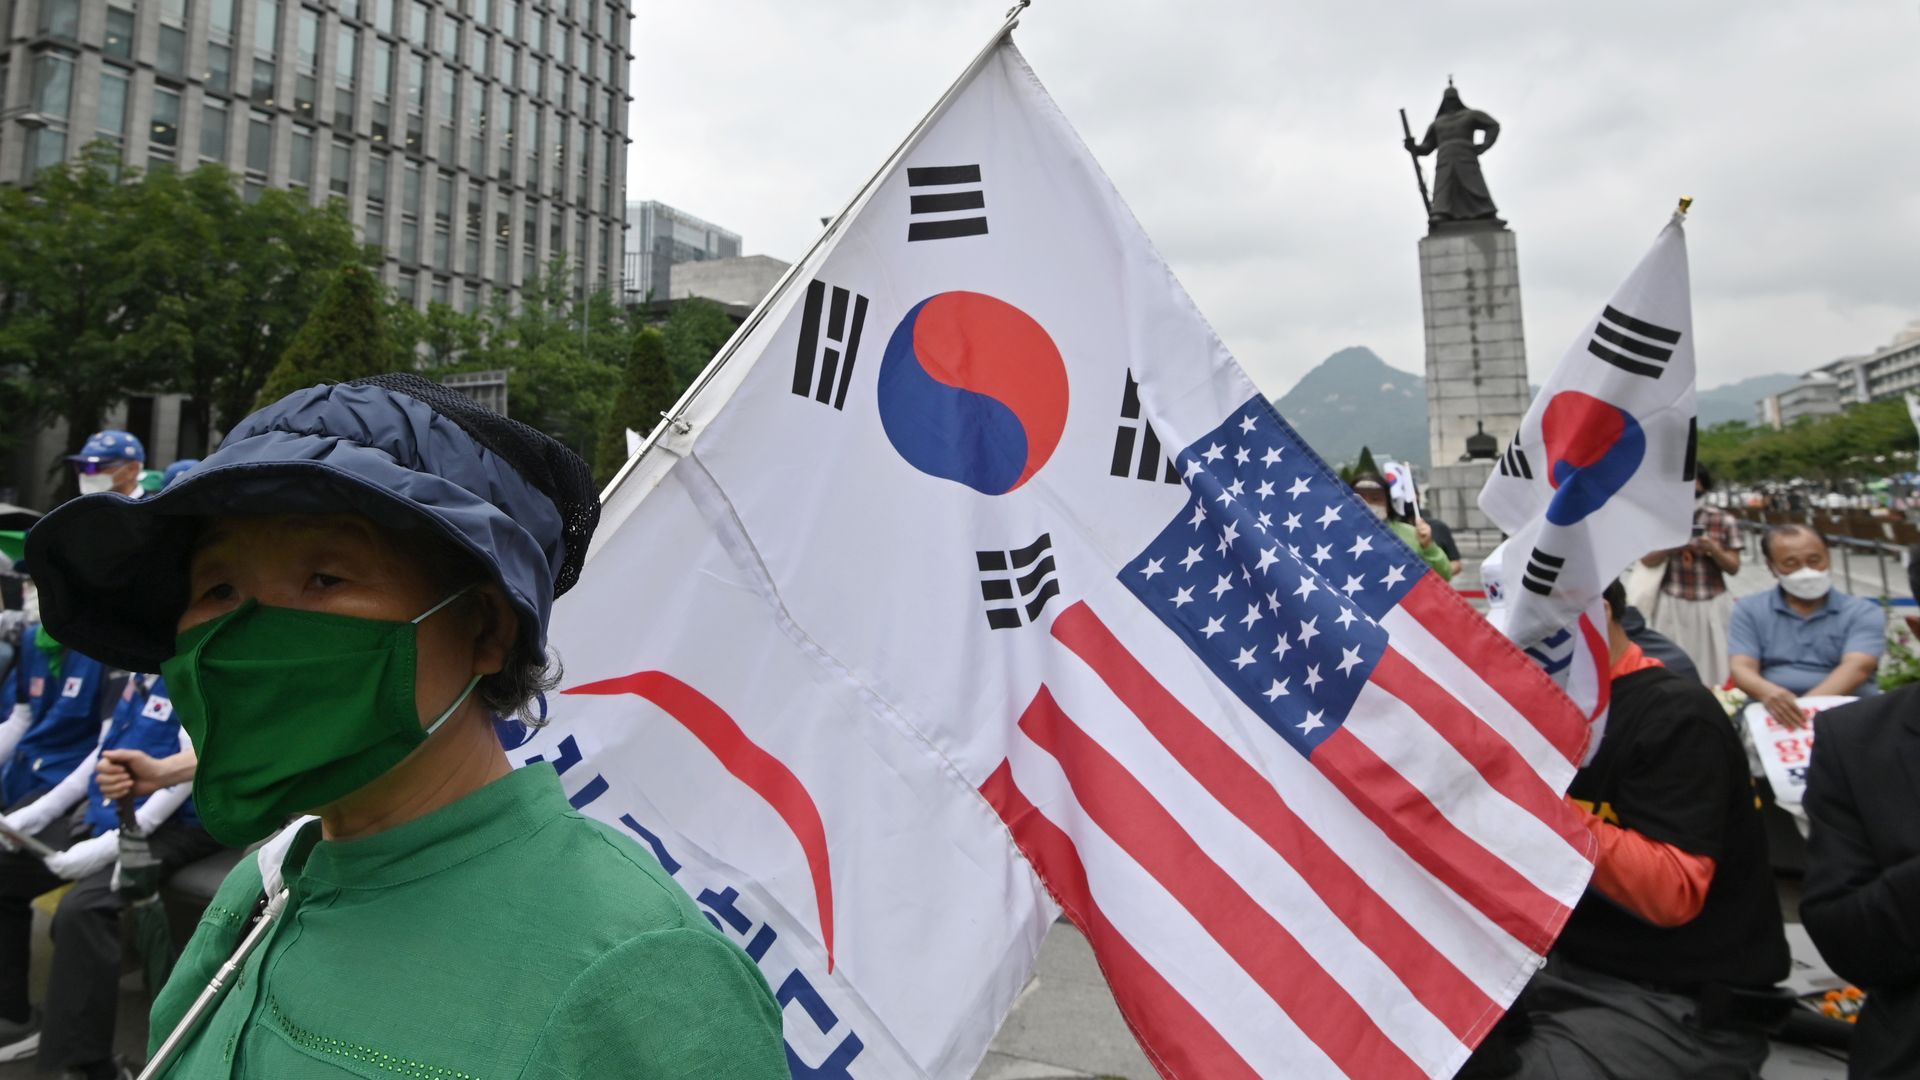  A South Korean woman holds flags of South Korea and the US during a rally commemorating the 70th anniversary of the beginning of the Korean War in Seoul on June 25